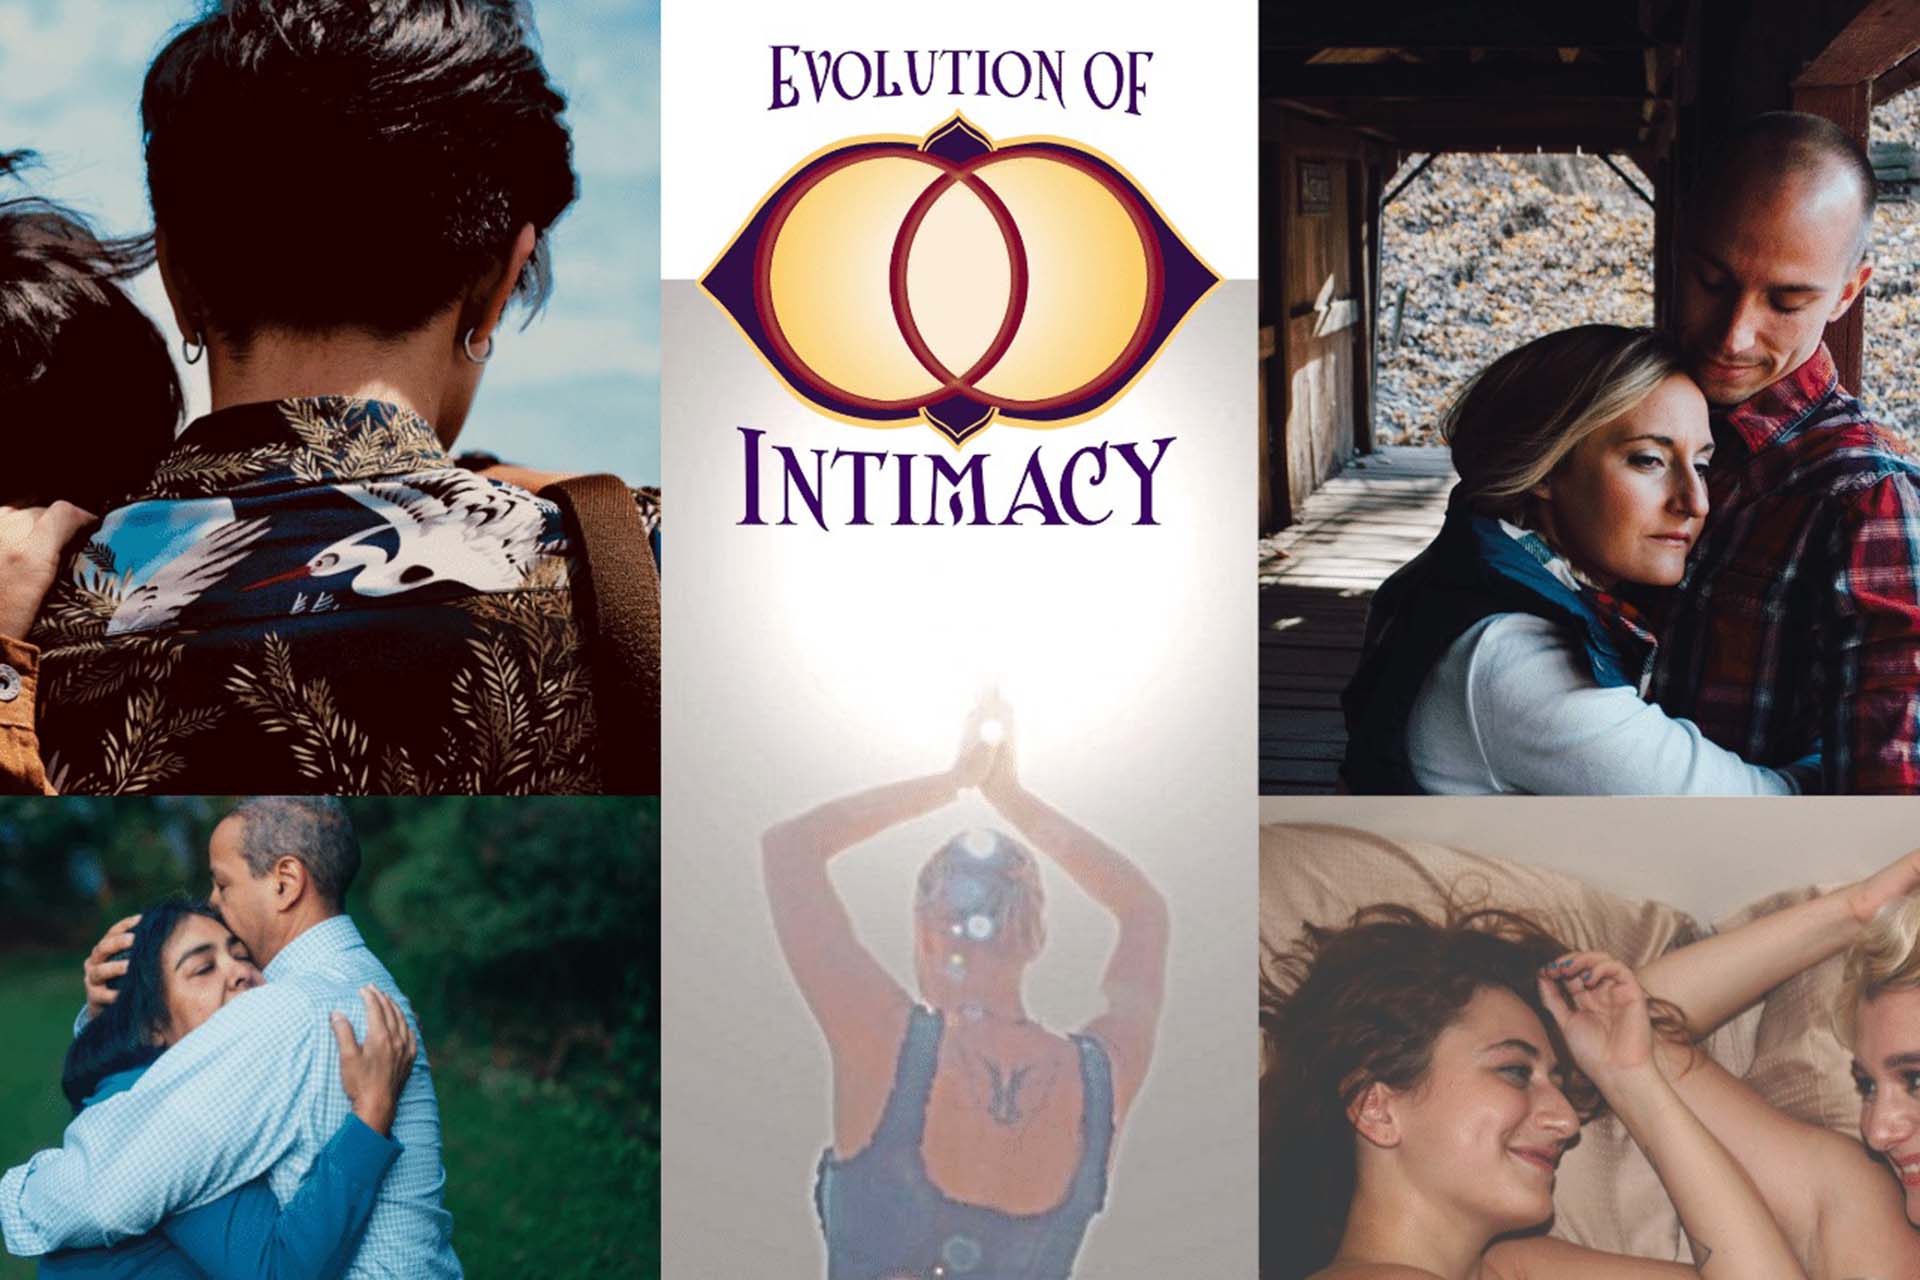 Evolution of Intimacy Couples Workshop for Intimacy and Connection